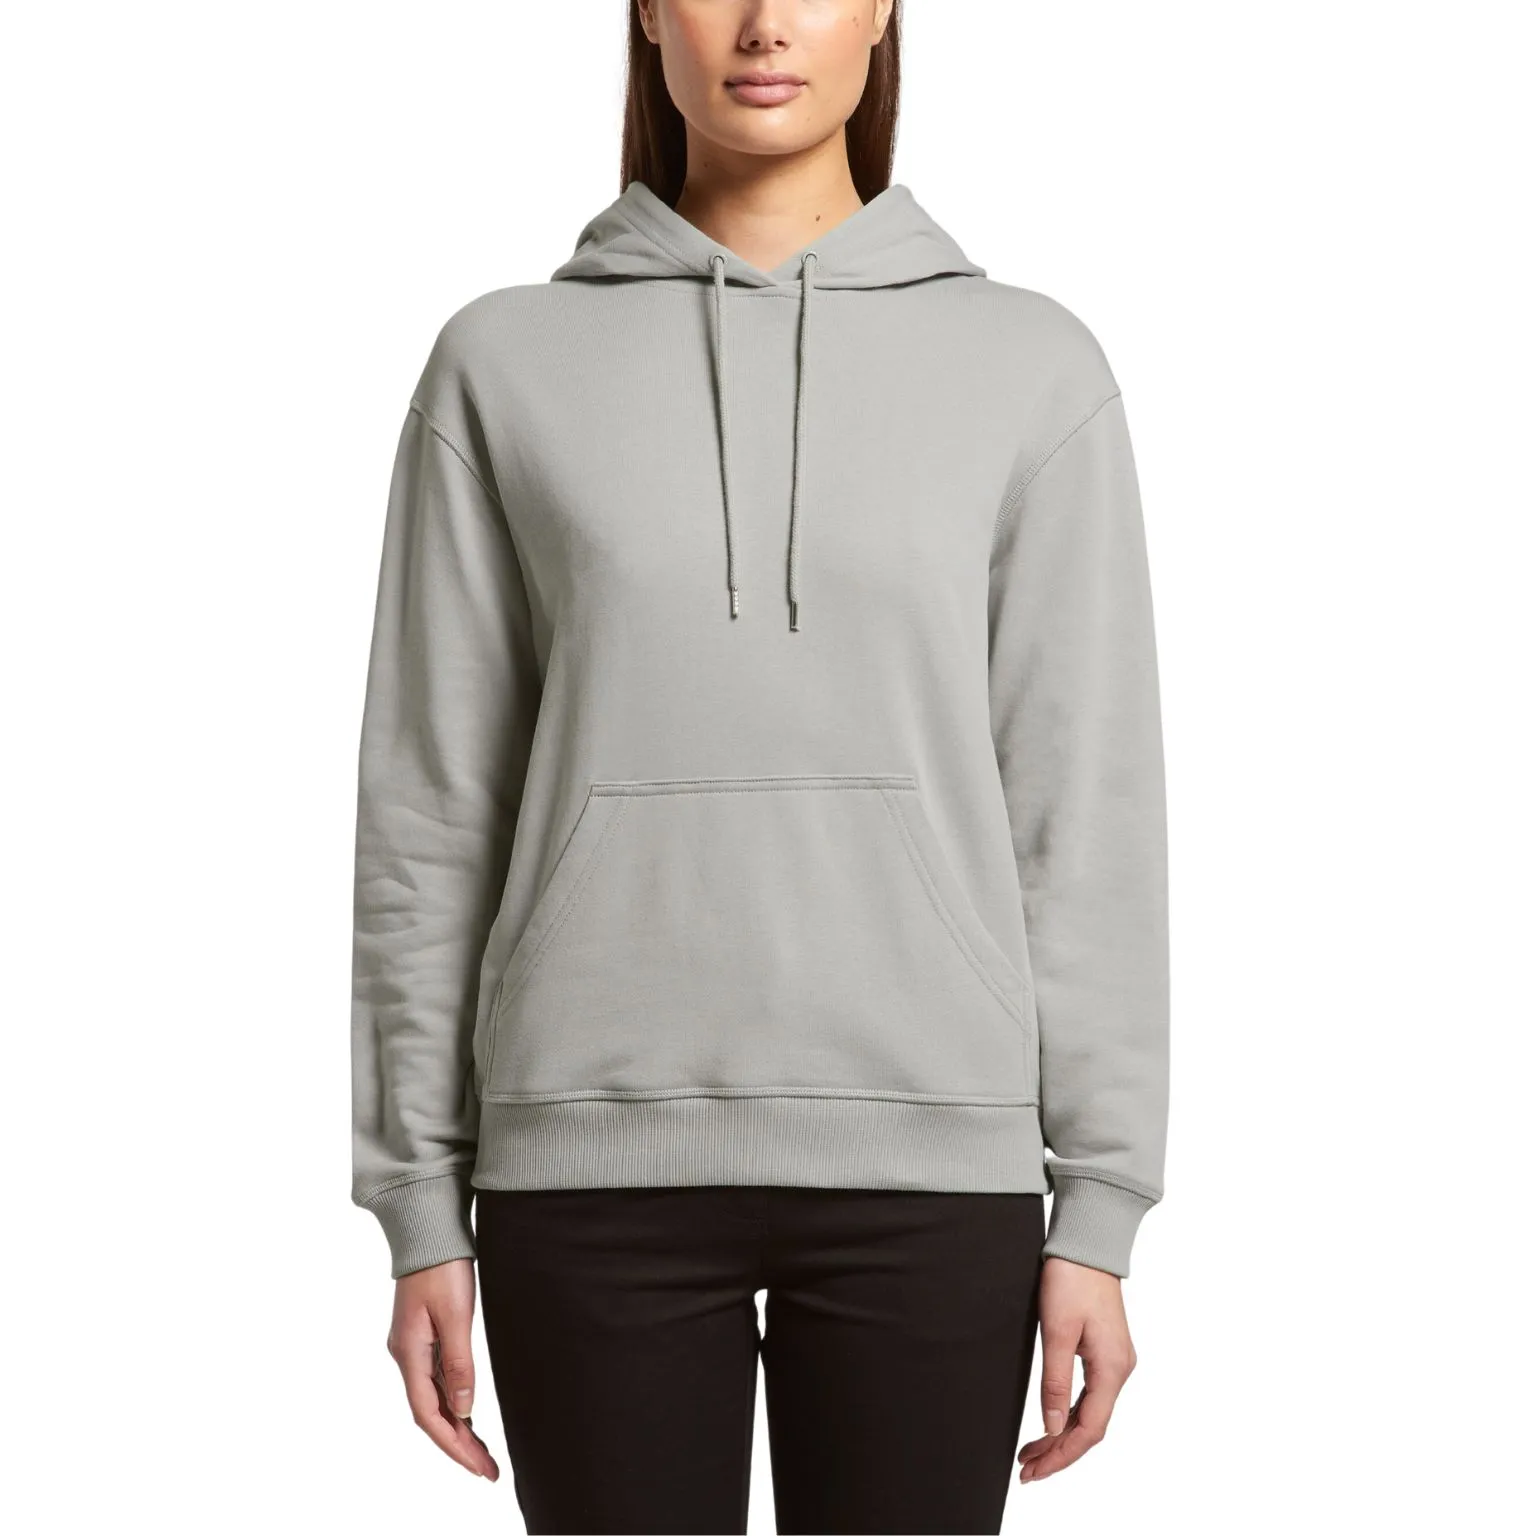 Unisex Hoodie manufacturing with trendy design